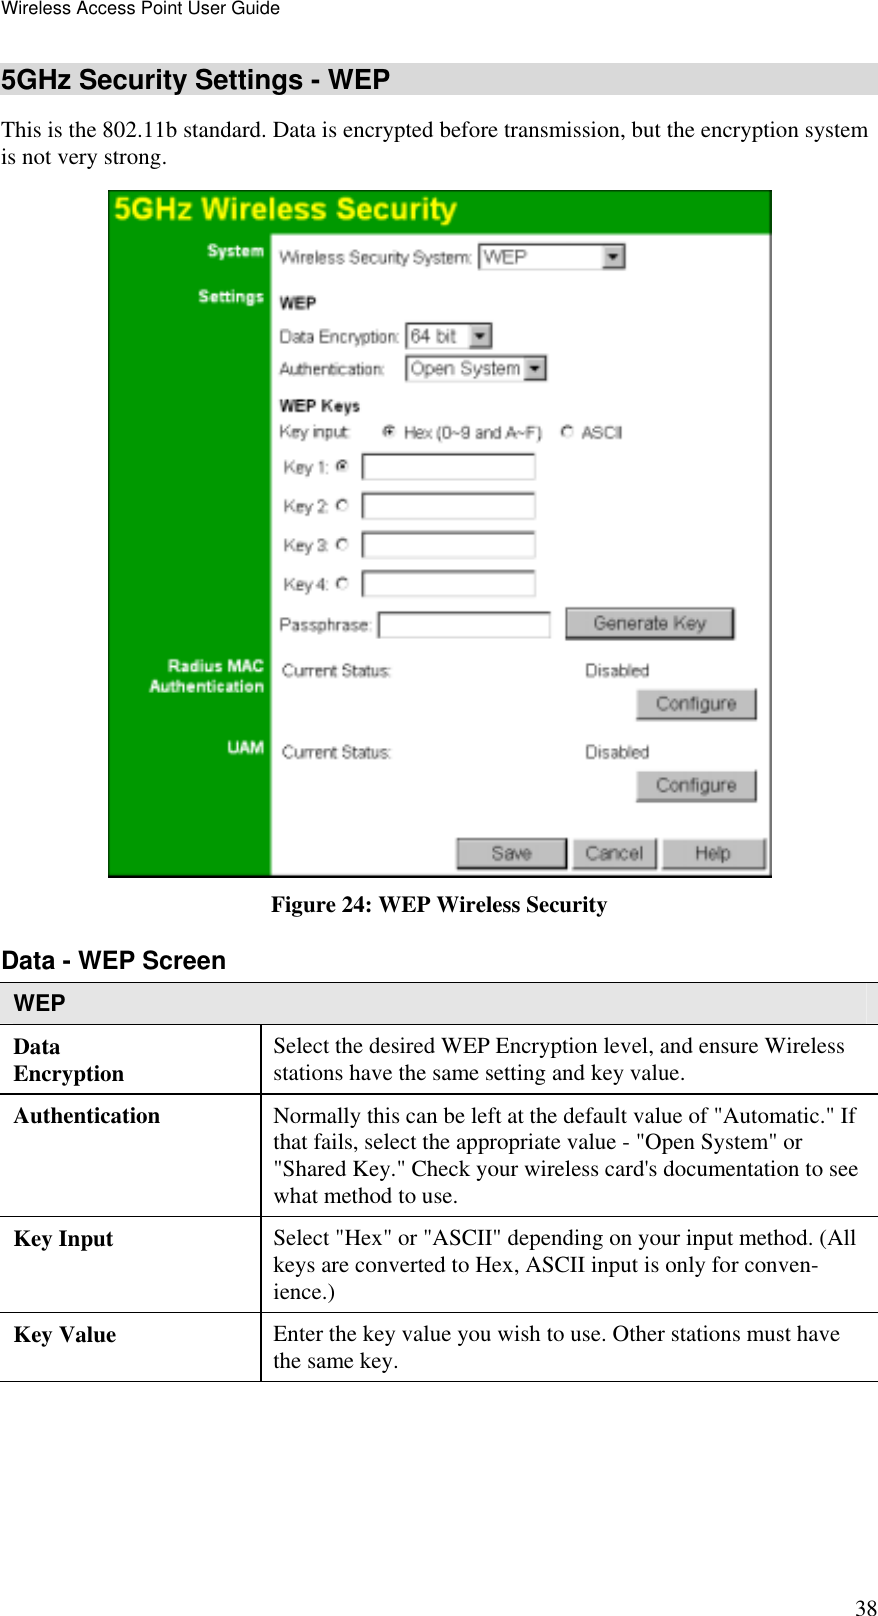 Wireless Access Point User Guide 38 5GHz Security Settings - WEP This is the 802.11b standard. Data is encrypted before transmission, but the encryption system is not very strong.  Figure 24: WEP Wireless Security Data - WEP Screen  WEP Data Encryption  Select the desired WEP Encryption level, and ensure Wireless stations have the same setting and key value. Authentication   Normally this can be left at the default value of &quot;Automatic.&quot; If that fails, select the appropriate value - &quot;Open System&quot; or &quot;Shared Key.&quot; Check your wireless card&apos;s documentation to see what method to use. Key Input  Select &quot;Hex&quot; or &quot;ASCII&quot; depending on your input method. (All keys are converted to Hex, ASCII input is only for conven-ience.) Key Value  Enter the key value you wish to use. Other stations must have the same key. 